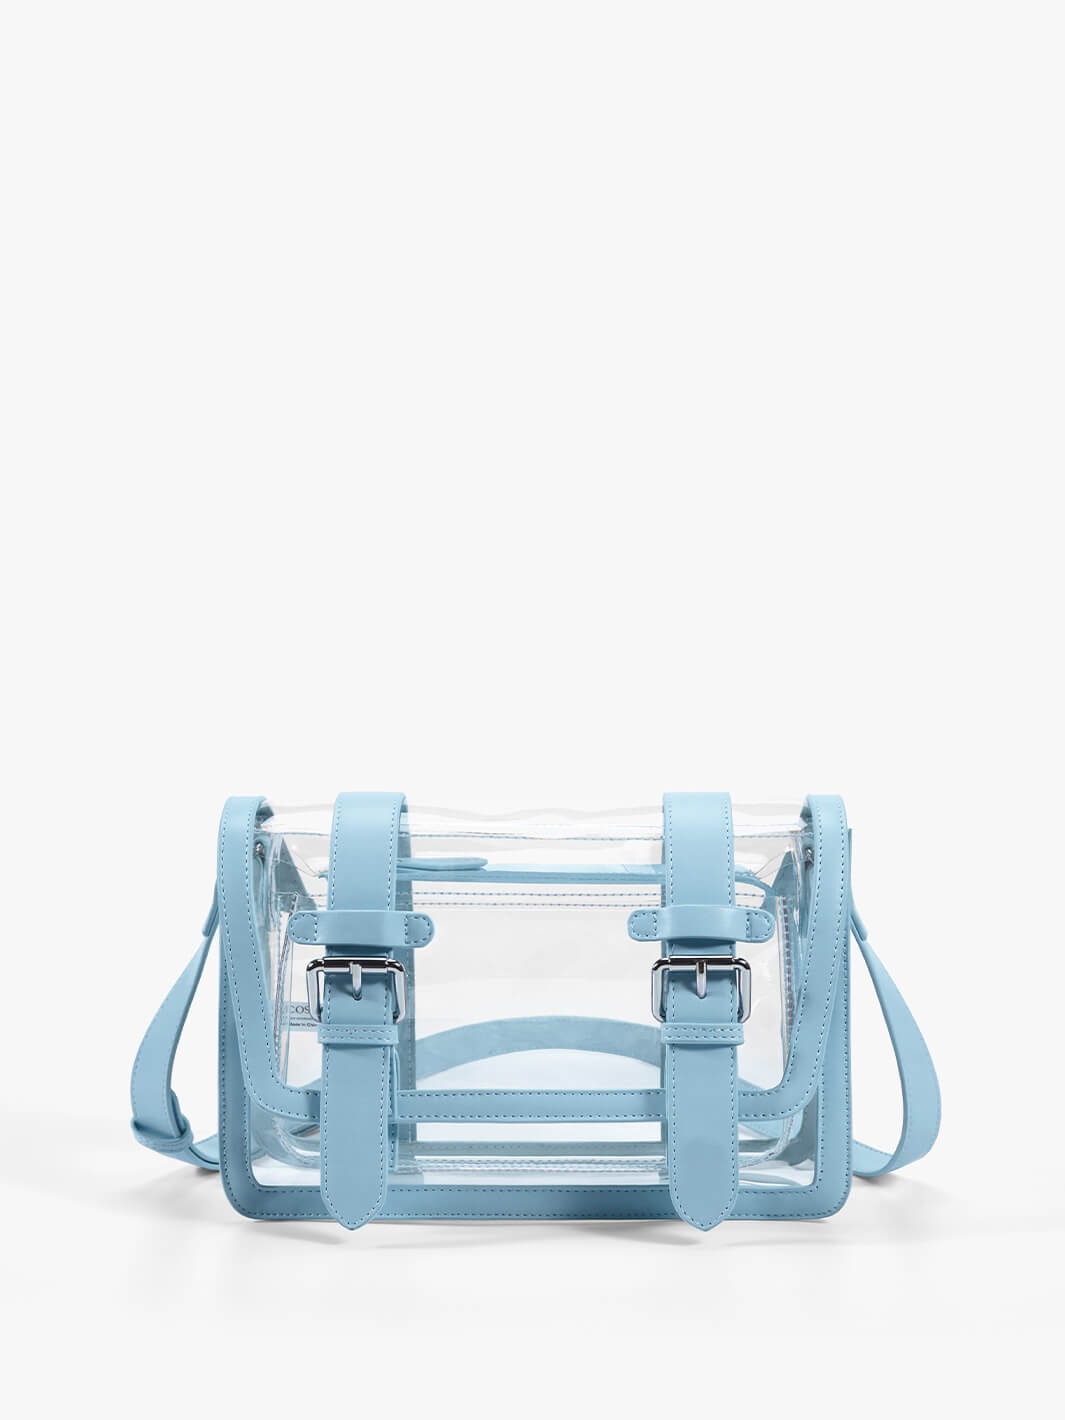 Jane's Clear Stadium-Approved Small Blue Messenger Bag